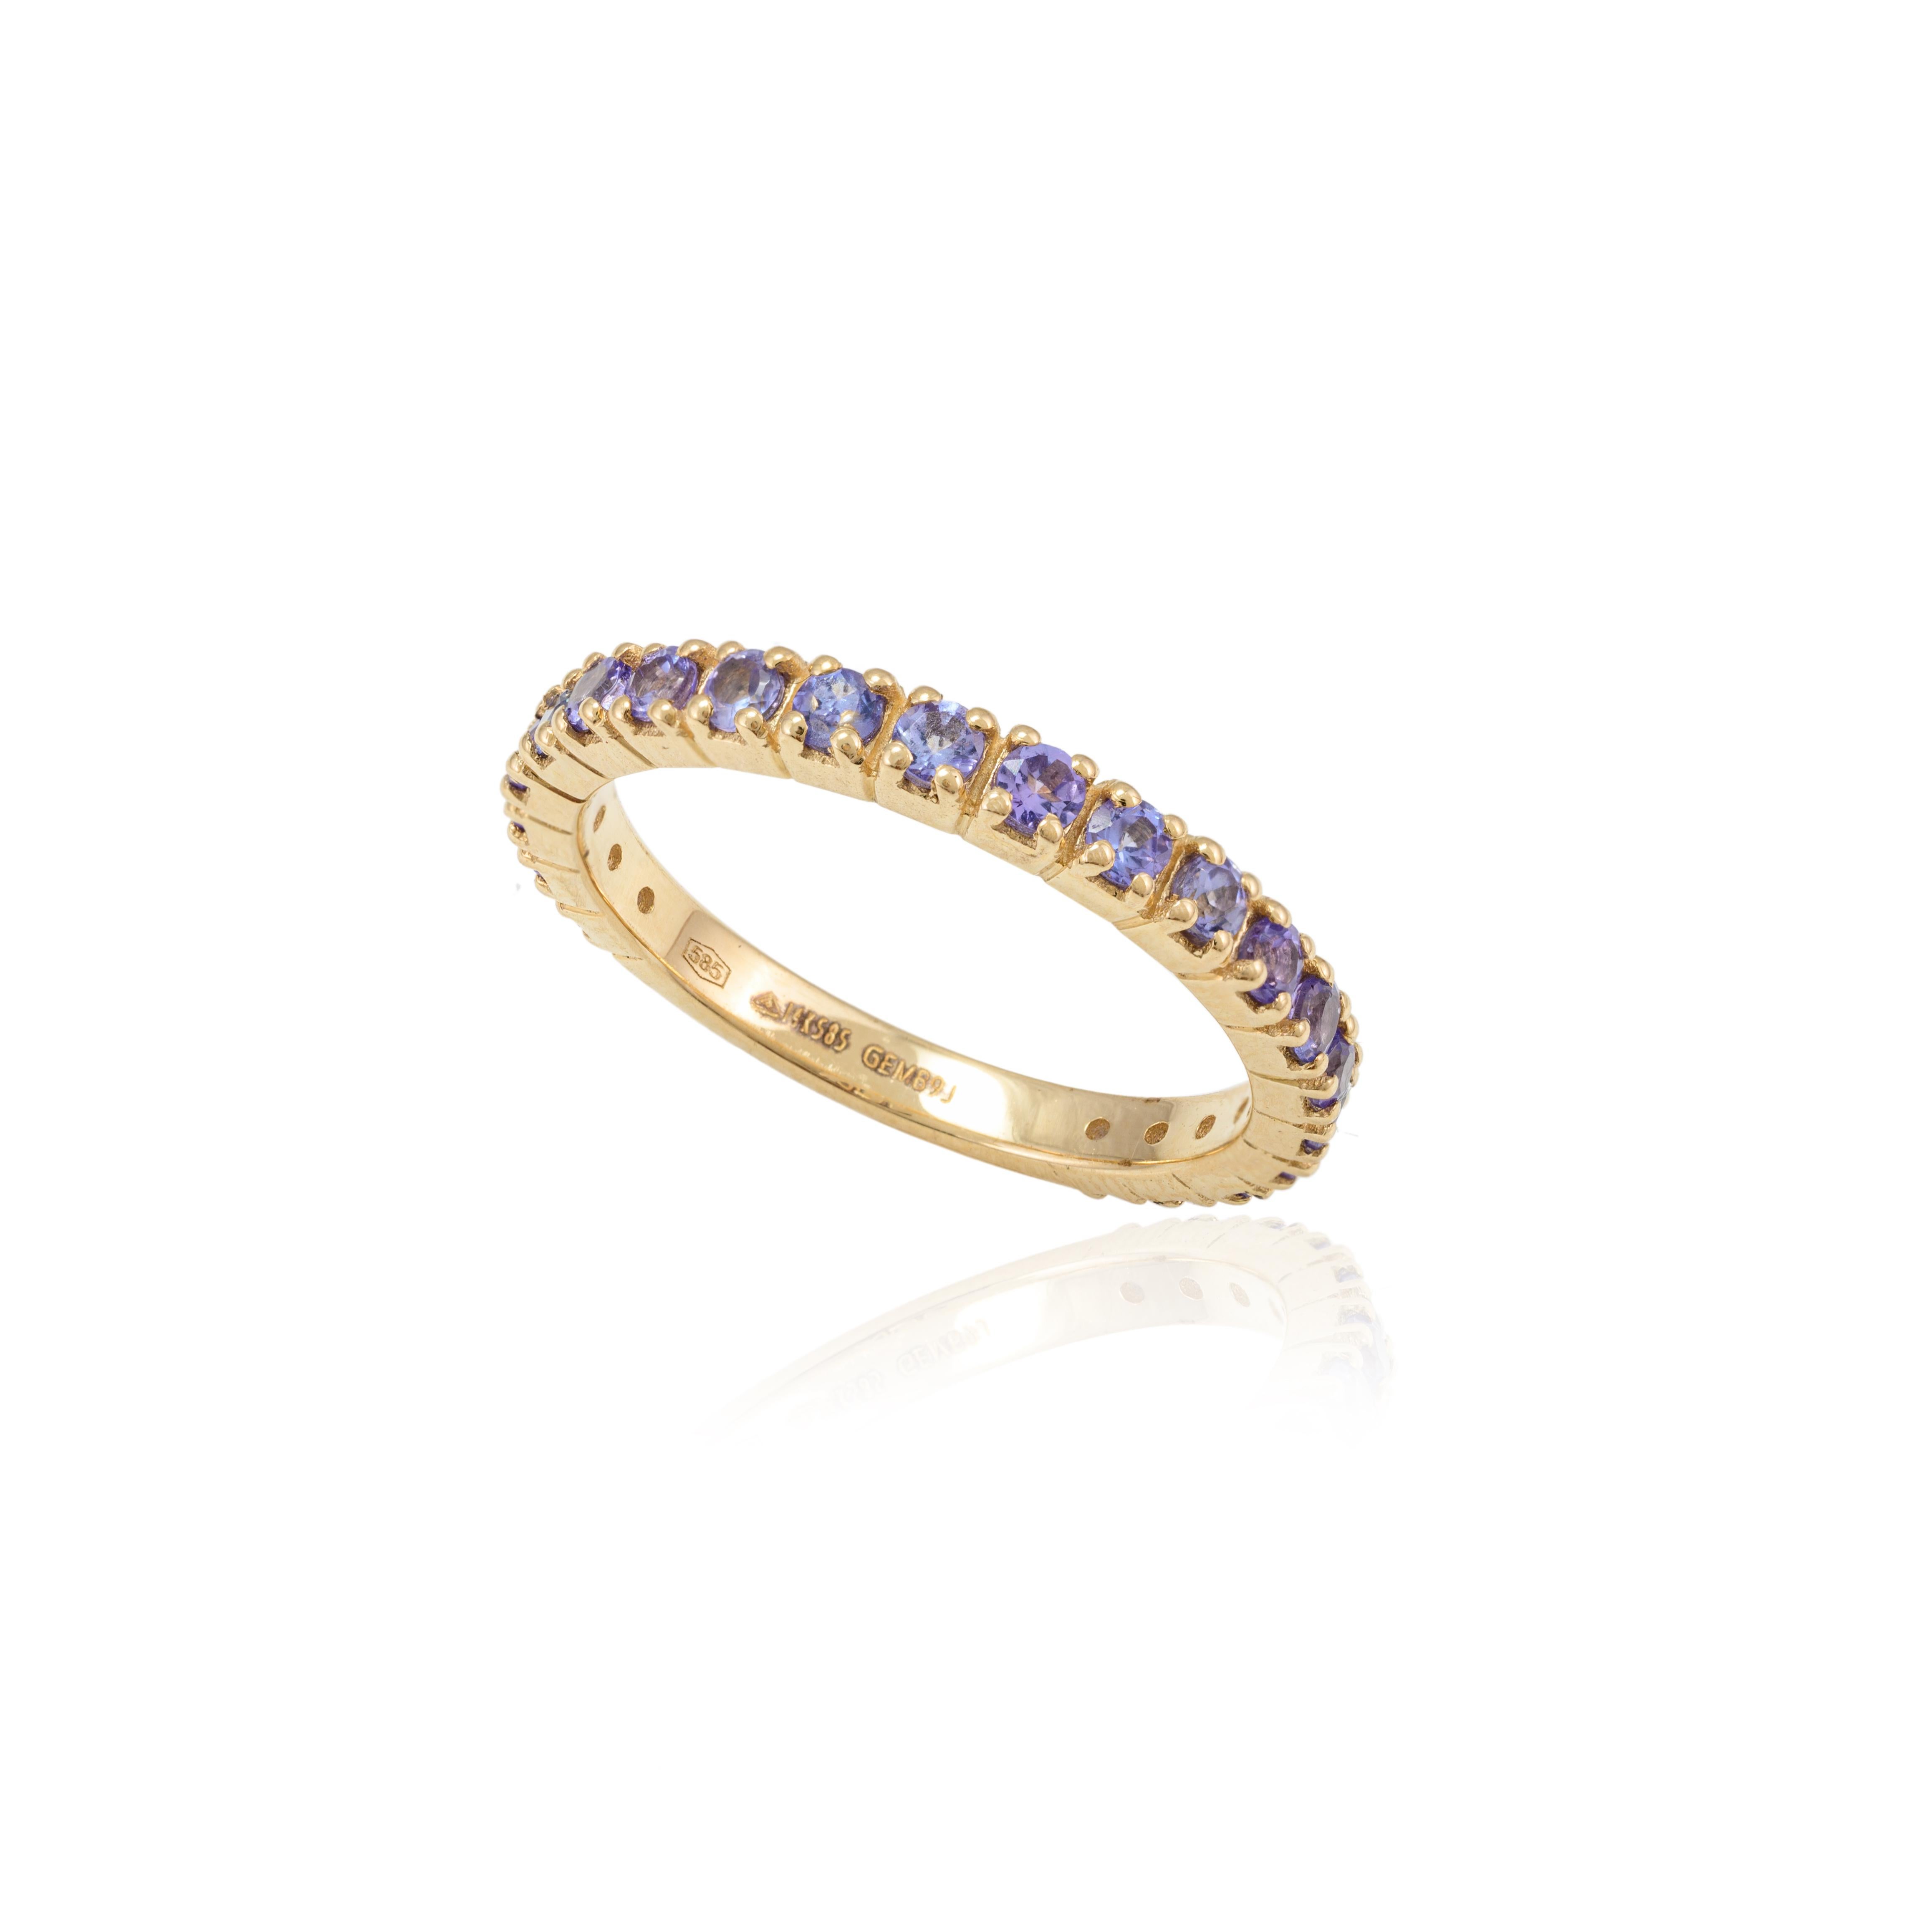 For Sale:  Genuine Round Cut Tanzanite Full Eternity Band Ring 14k Solid Yellow Gold 5